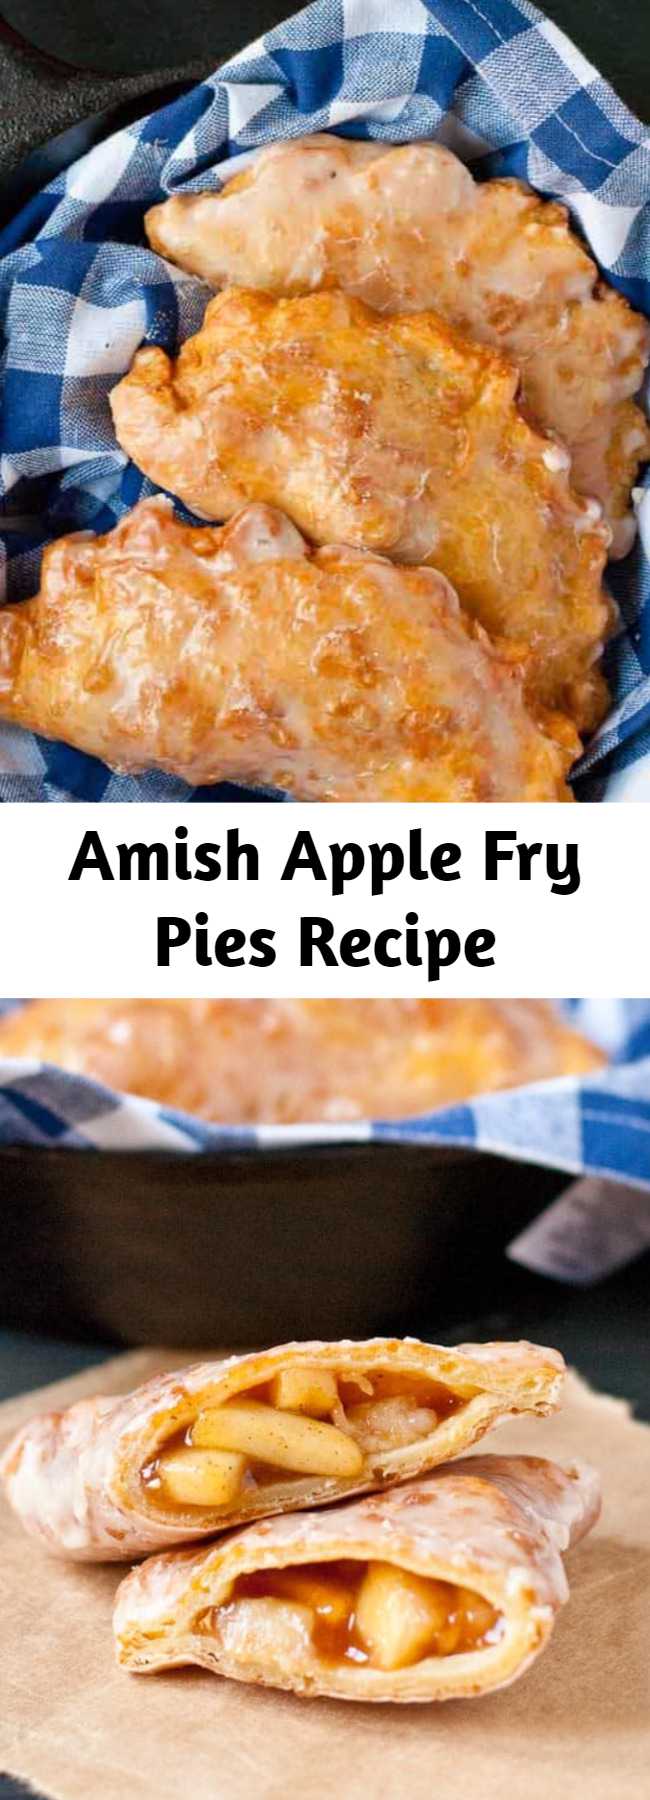 Amish Apple Fry Pies Recipe - These Amish Apple Fry Pies are irresistible. The filling is simple with just a hint of spice. The crust is tender and flaky and just a little crunchy. And the glaze? It dries into a crackly sweet coating that seals in all the goodness.